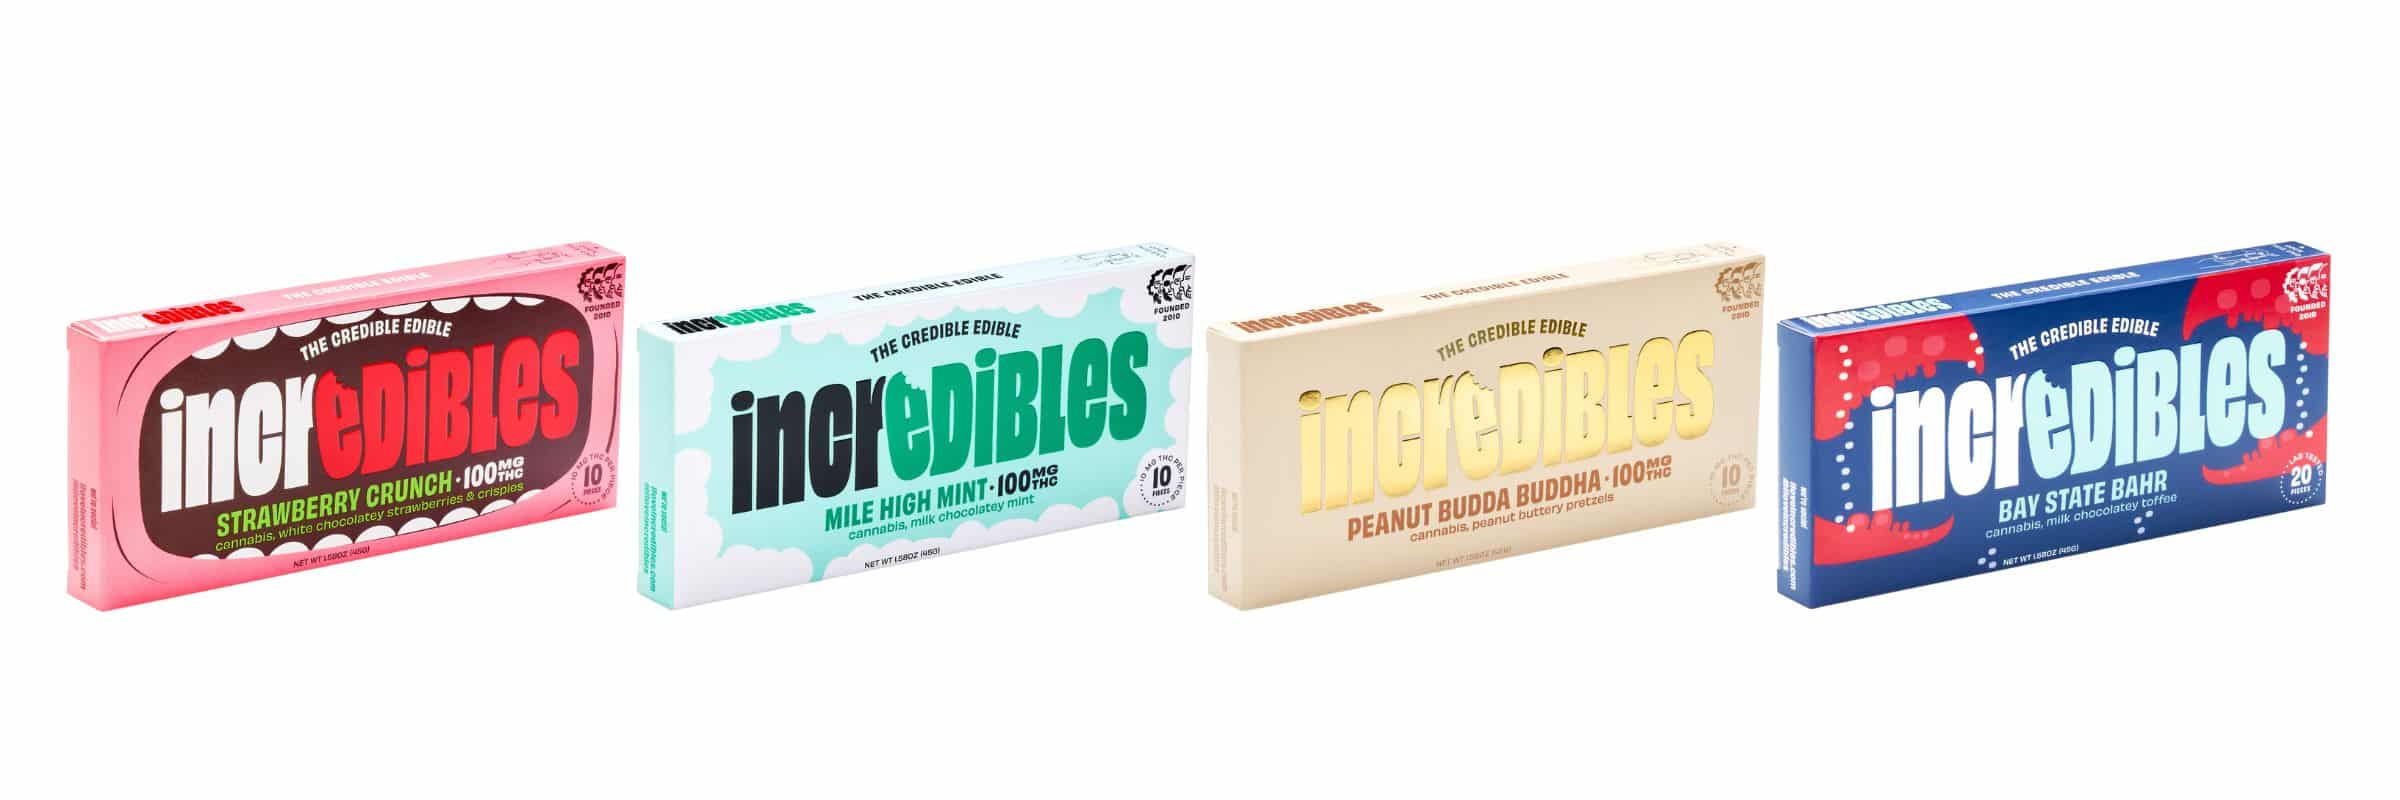 Incredibles Cannabis-Infused Chocolate Bars